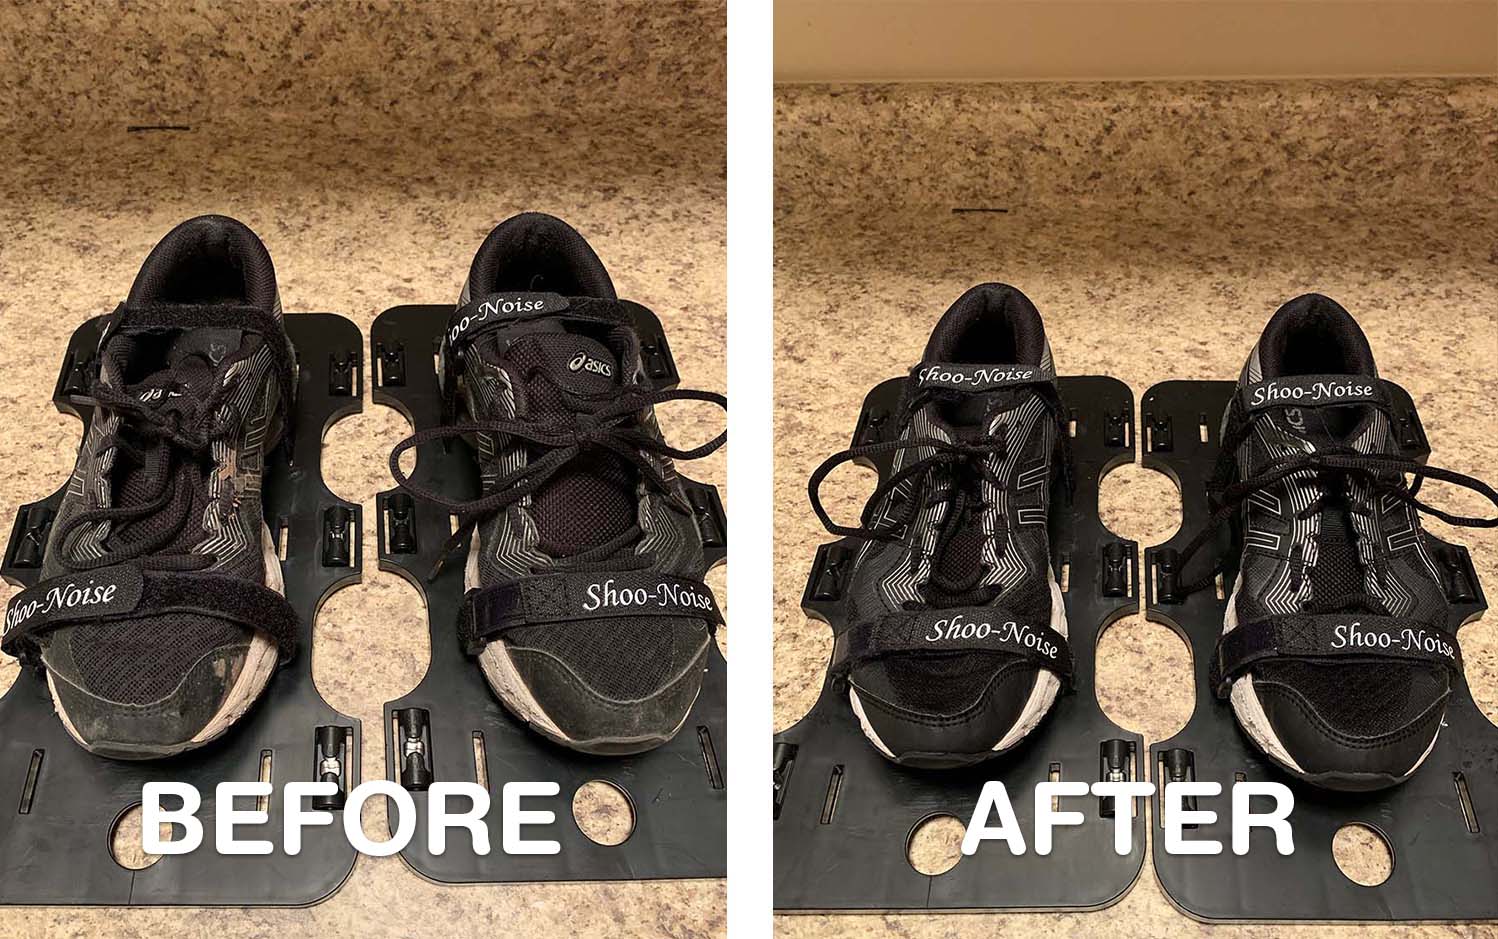 Shoo-Noise – Your One Stop Shoe Cleaning Solution